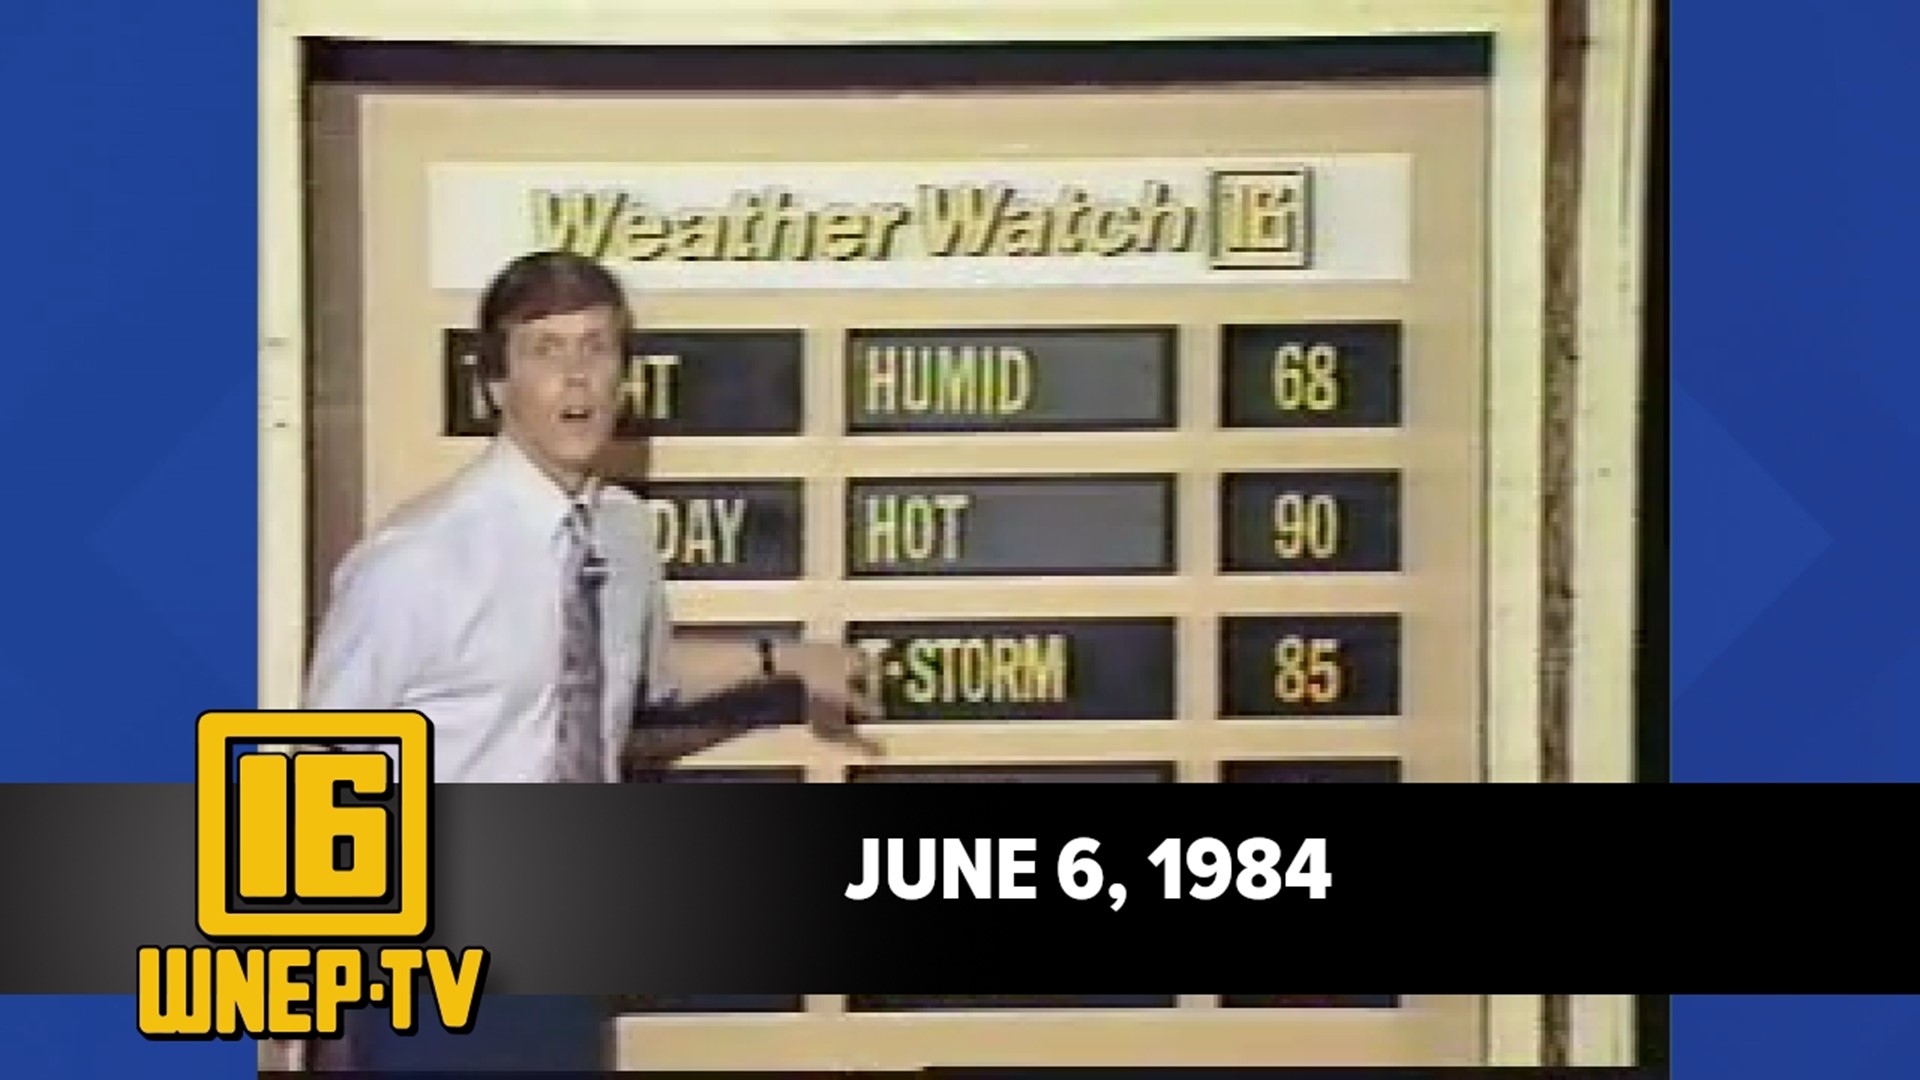 Join Karen Harch and Nolan Johannes with curated stories from June 6, 1984.